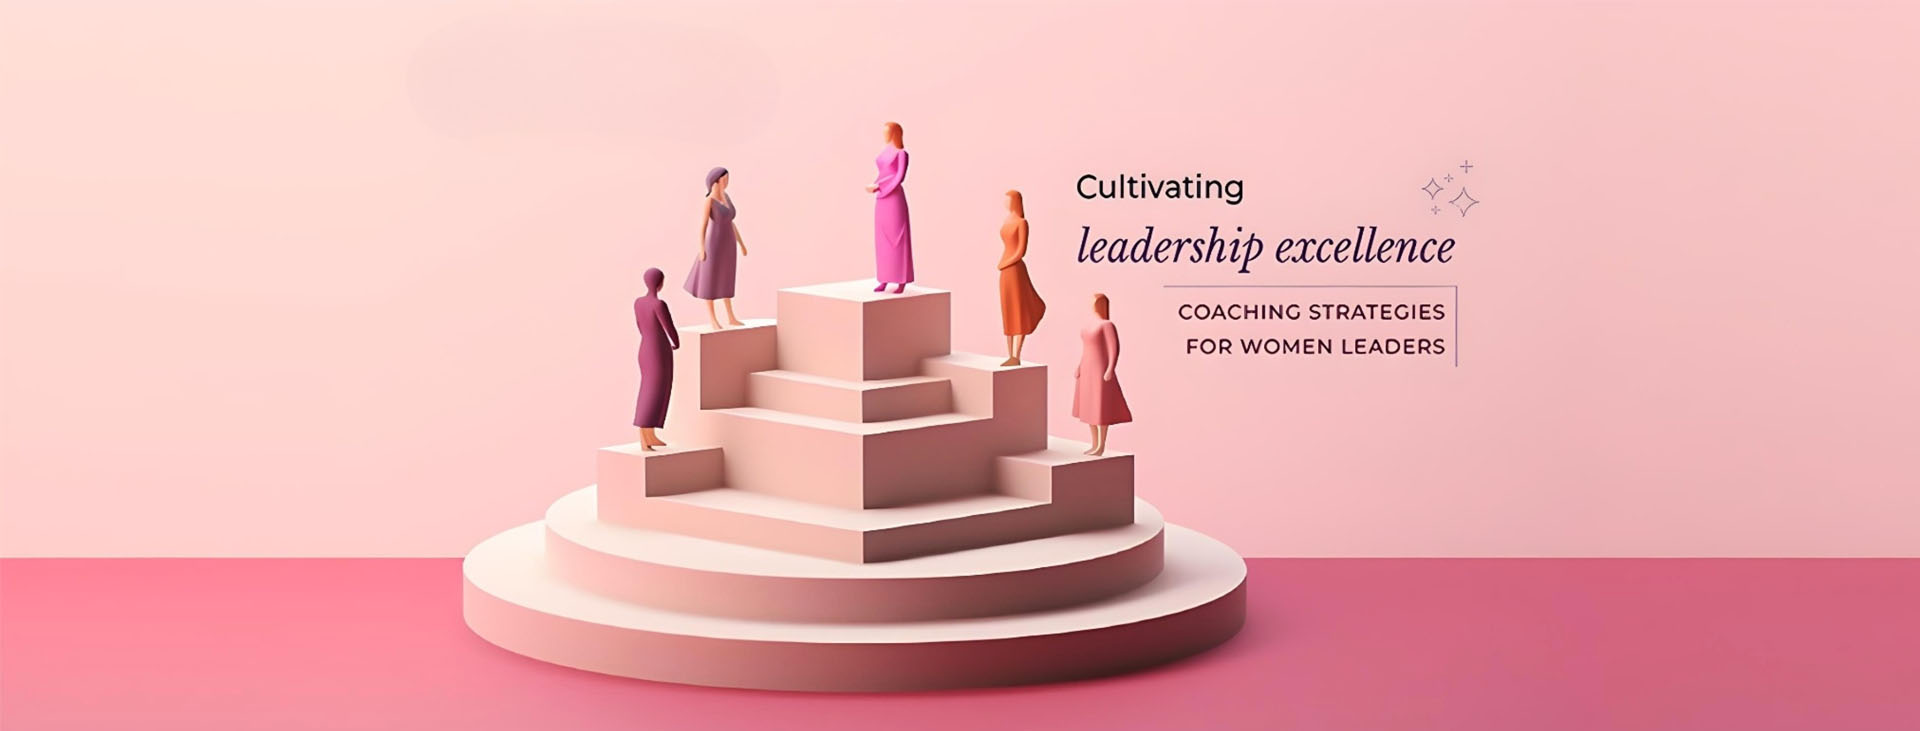 Mentoring Matters - Navigating the Leadership Labyrinth: A Coaching Guide for Women